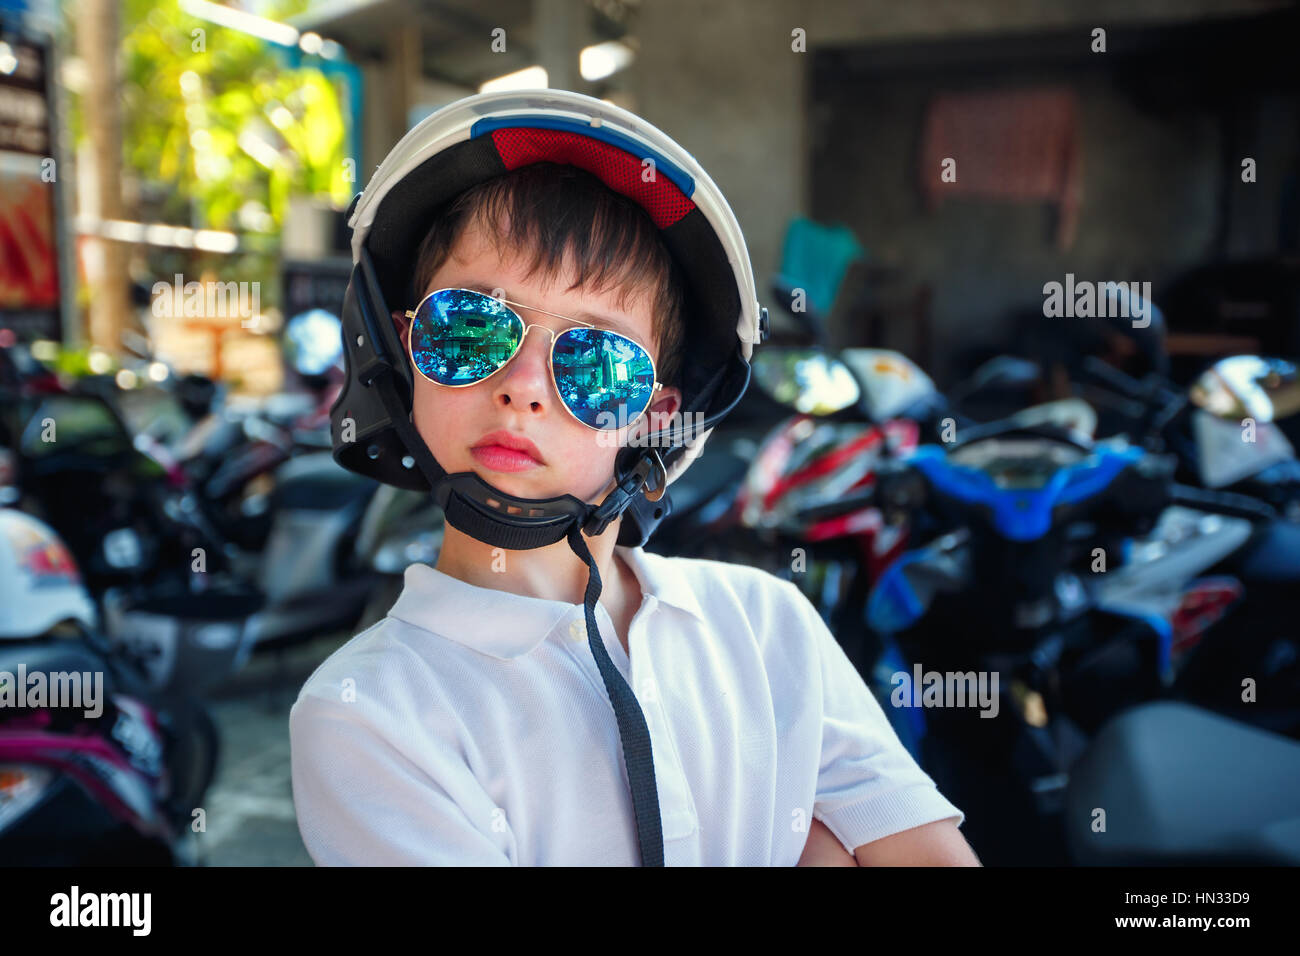 Portrait of cute little boy in helmet and sunglasses before riding a motorcycle Stock Photo